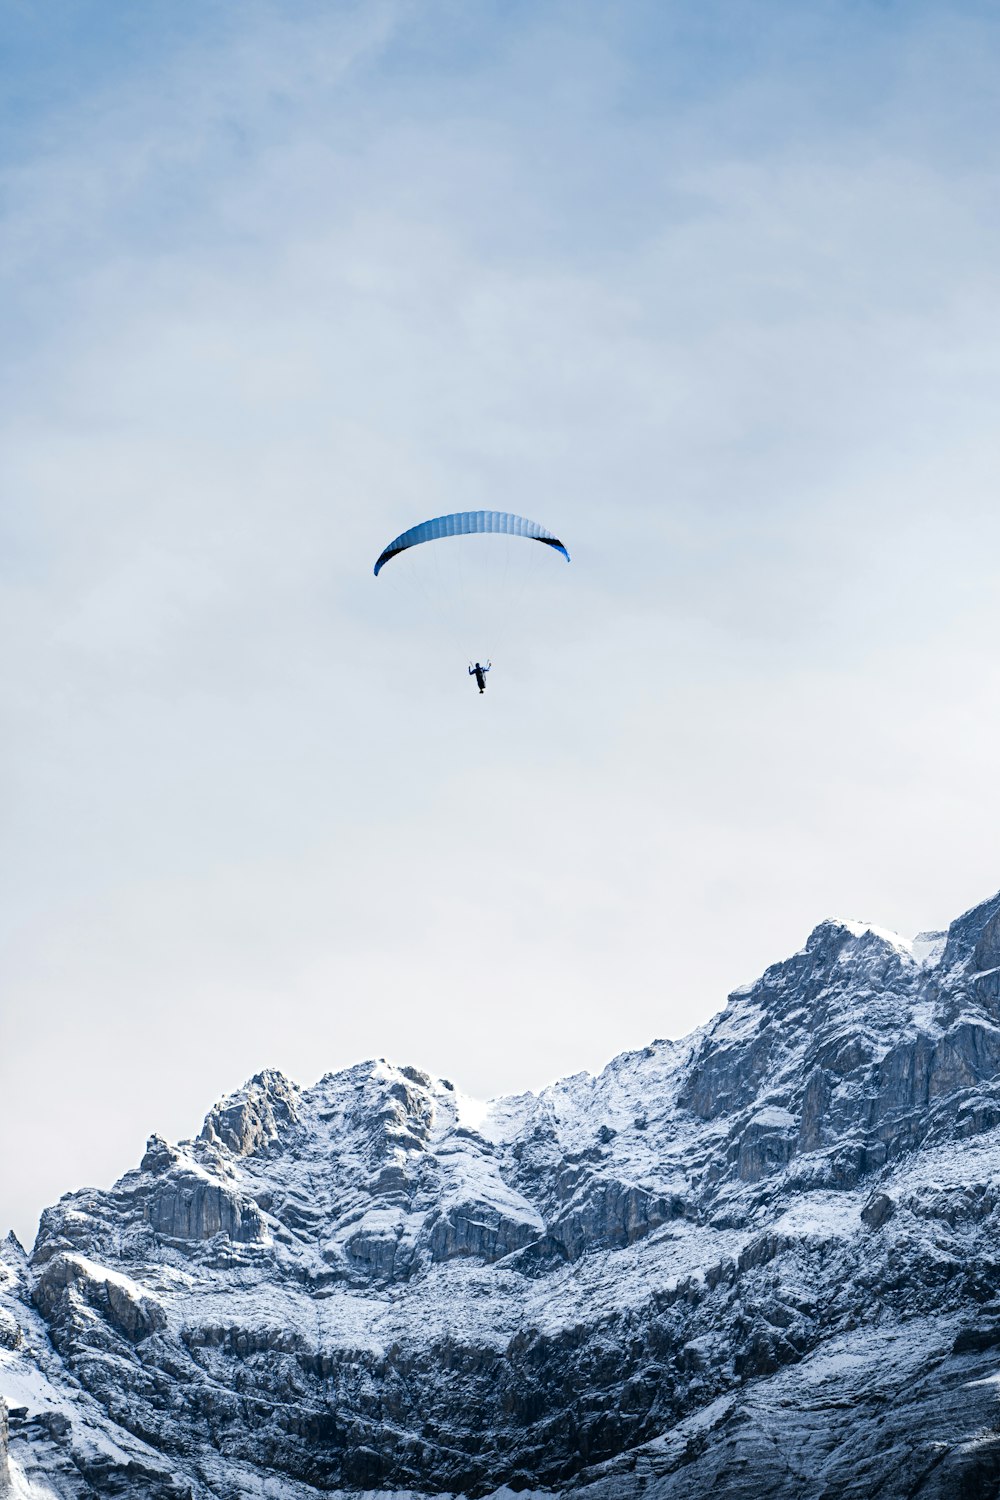 a paraglider flying over a snowy mountain range